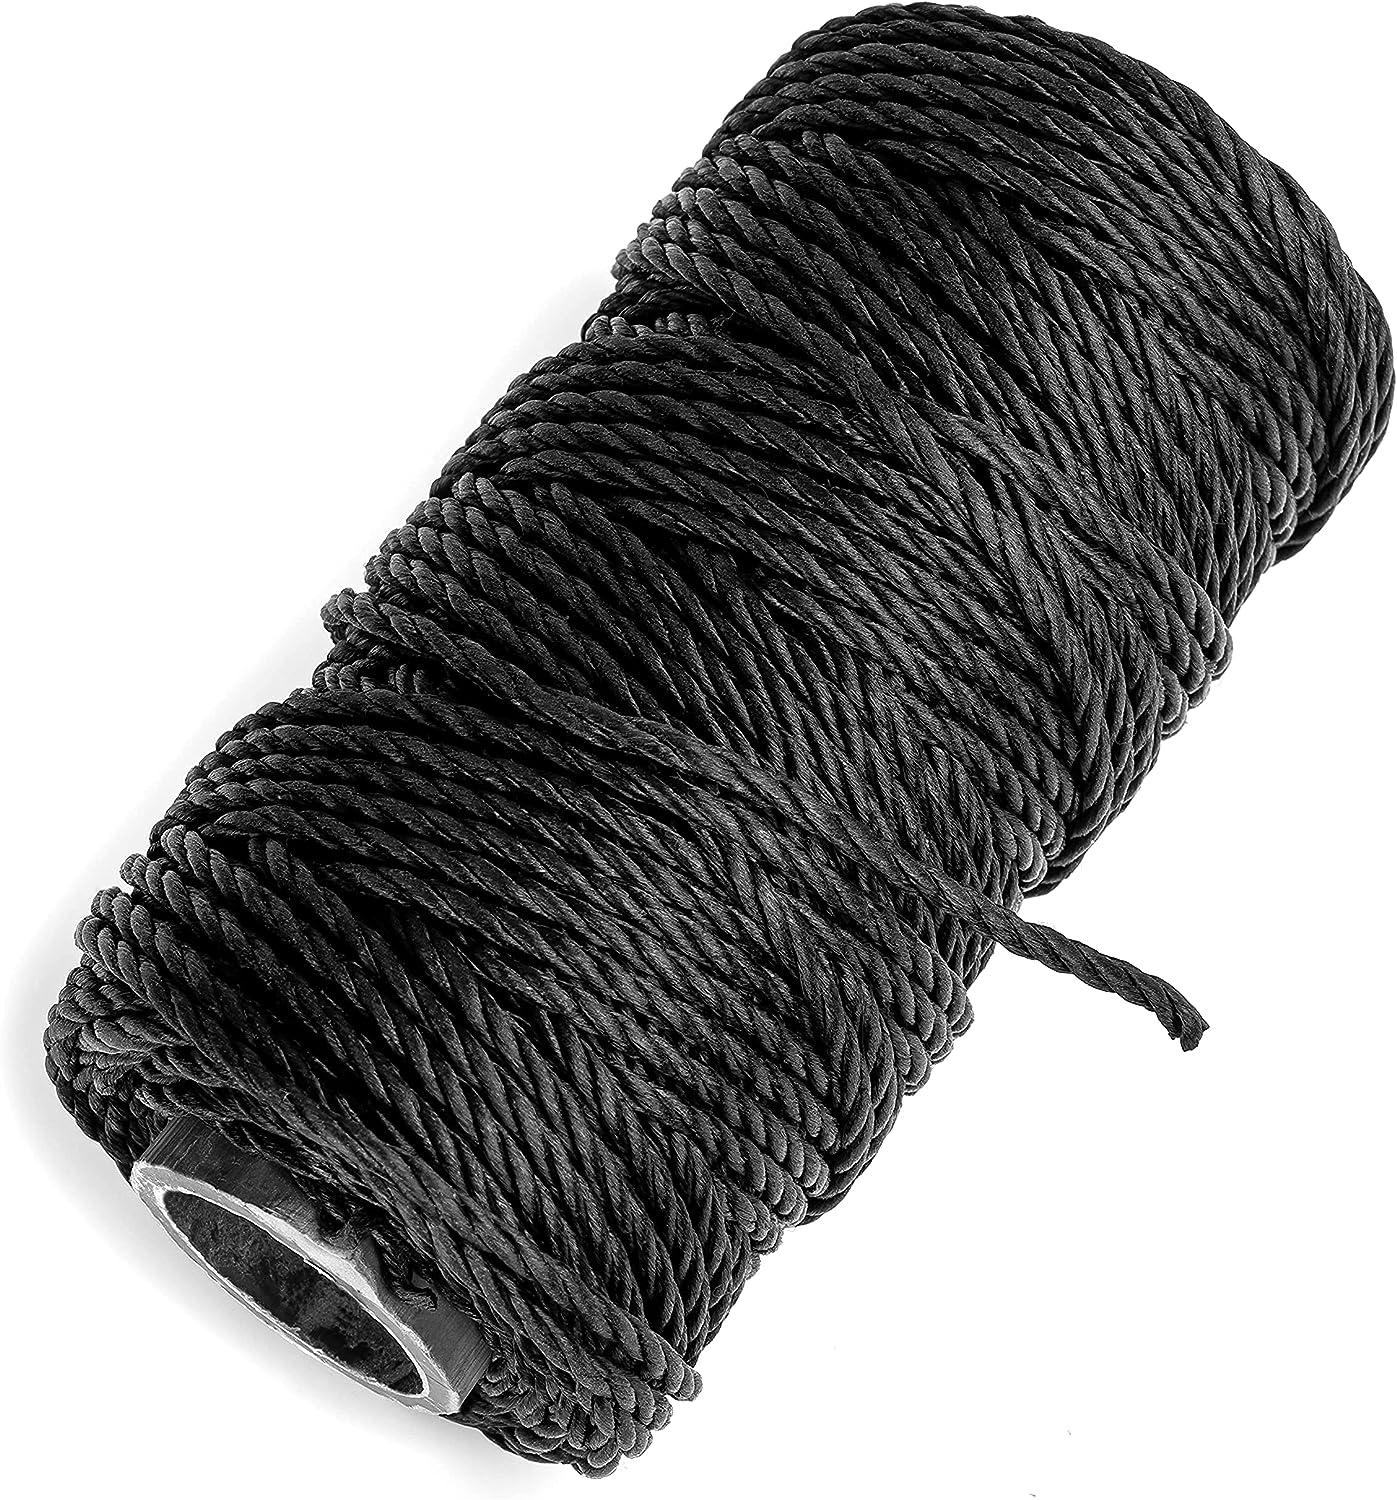 2263FT #36 Bank Line Twine Green No.36 Twisted Seine Twine Strong Nylon  Nylon Twine String for Fishing, Camping, Outdoor Survival, Decoy Lines